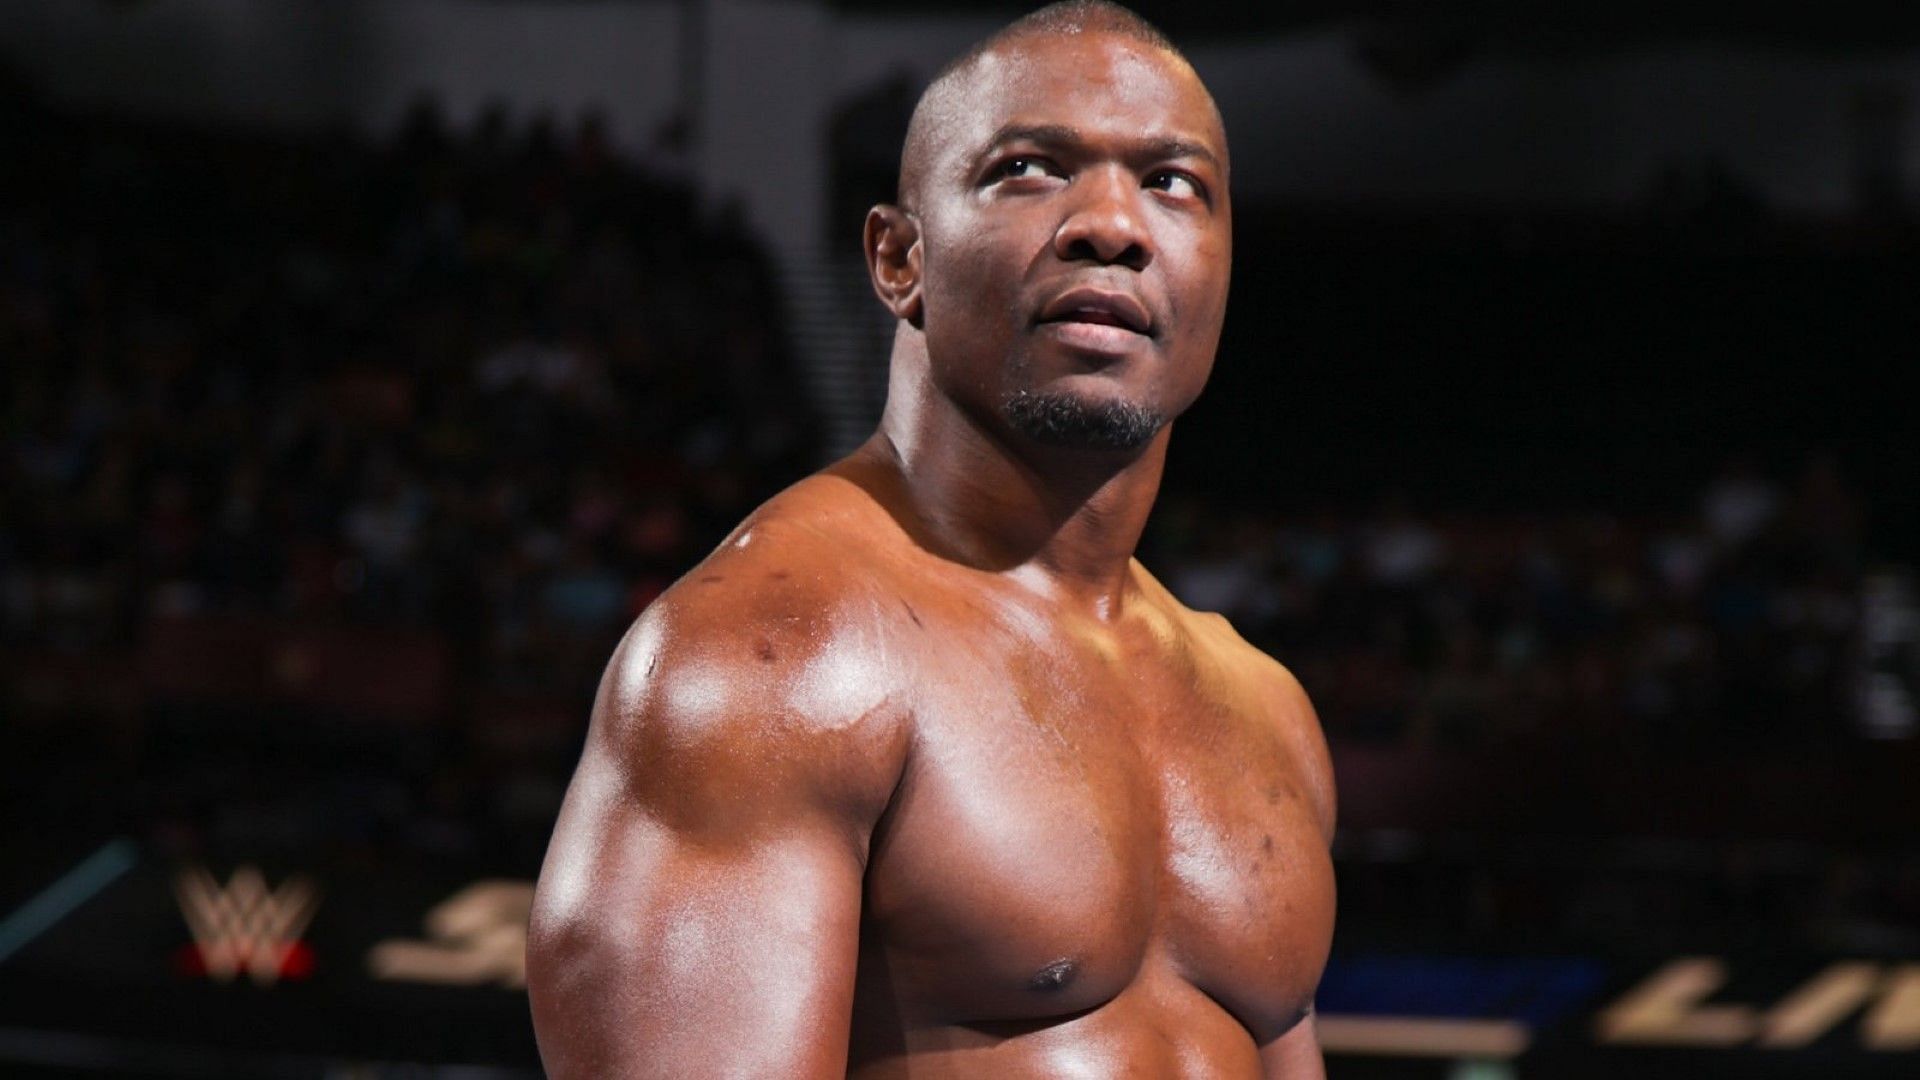 Shelton Benjamin looks on from the WWE ring